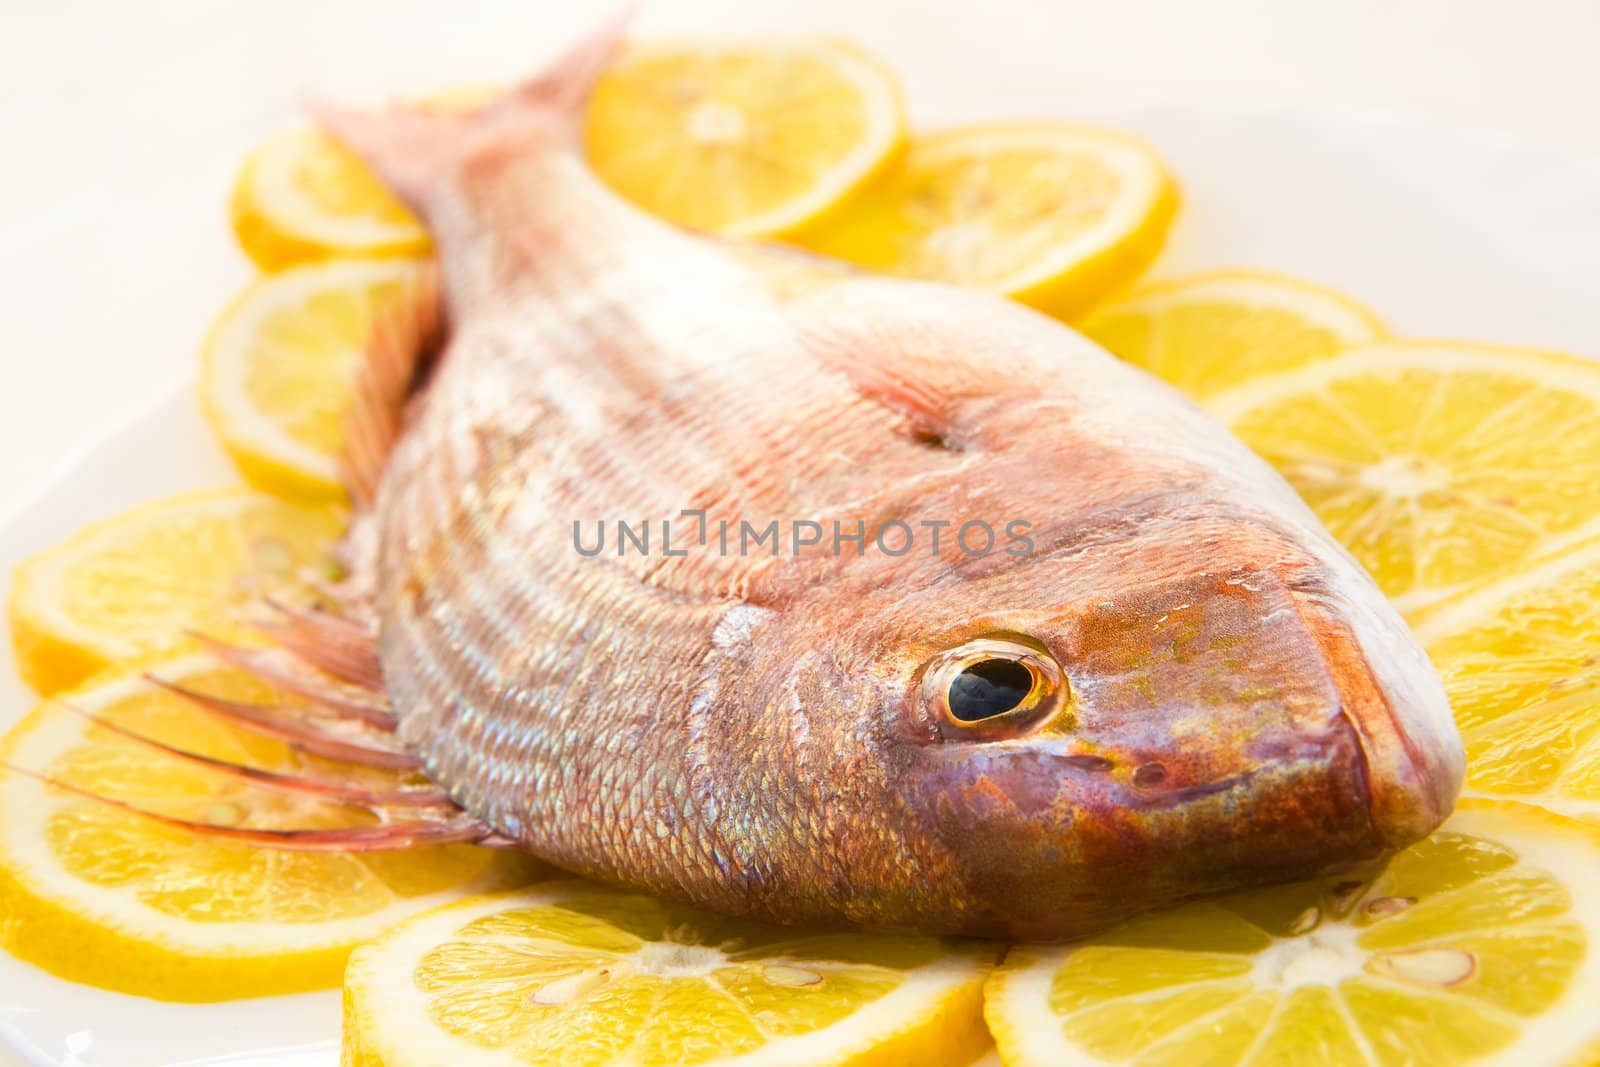 Dorado lays in an environment of slices of a lemon close up on a white background
